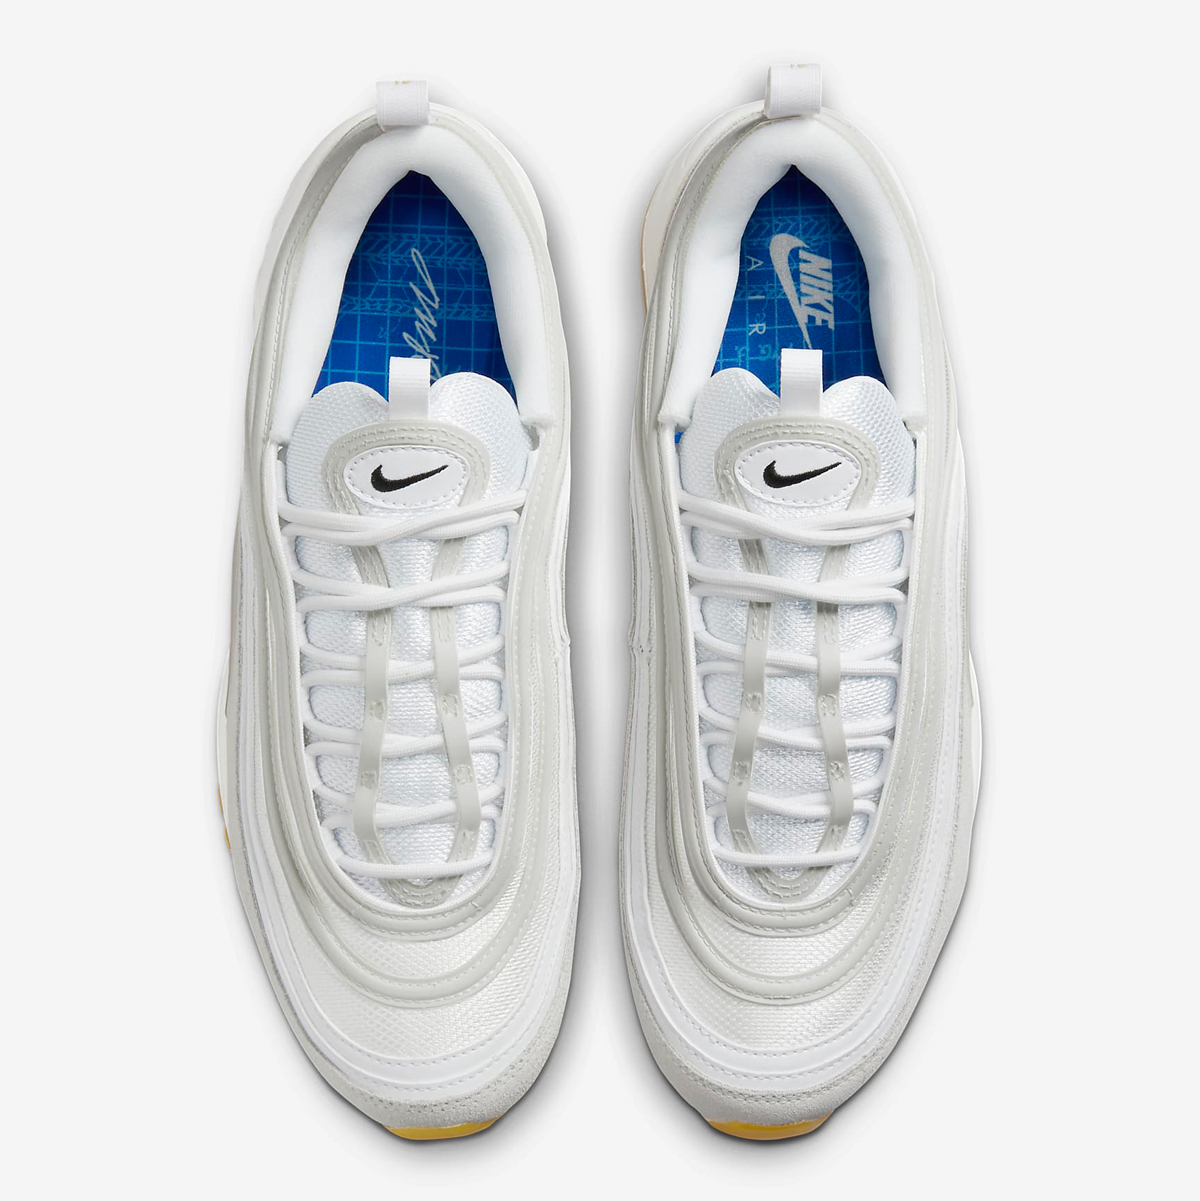 NIke-Air-Max-97-Frank-Rudy-Where-to-Buy-4